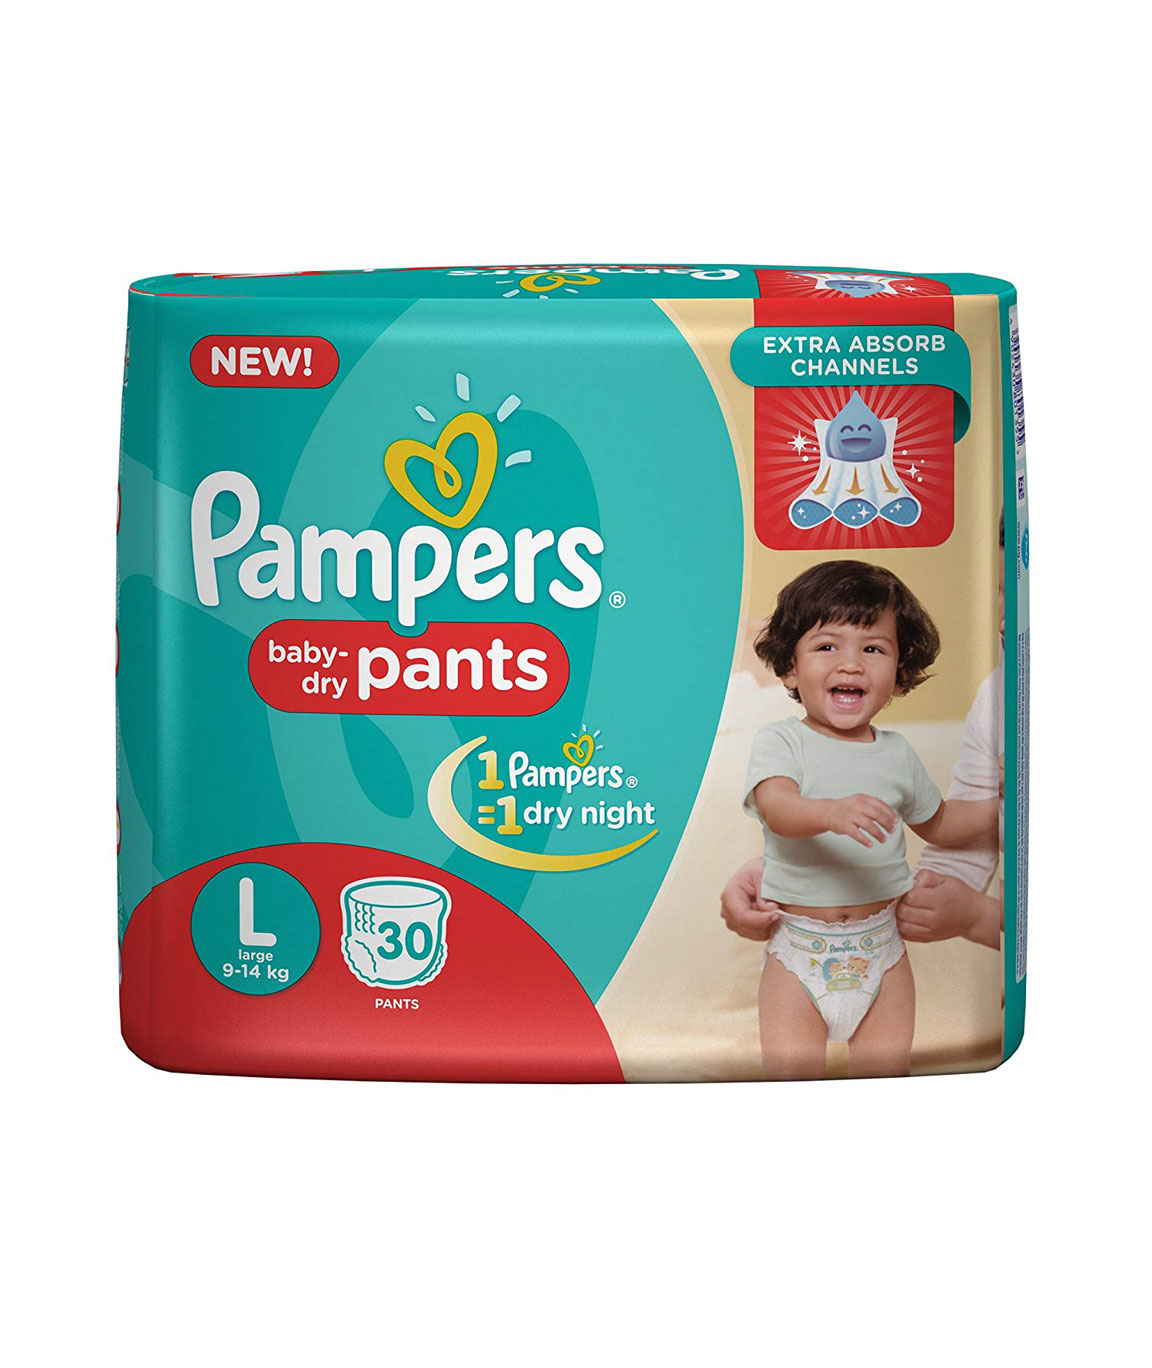 Buy Pampers All round Protection Pants, Large size baby diapers (LG), 42  Count, Anti Rash diapers, Lotion with Aloe VeraAll round Protection Pants, Large  size baby diapers L- 42 Count, Anti Rash